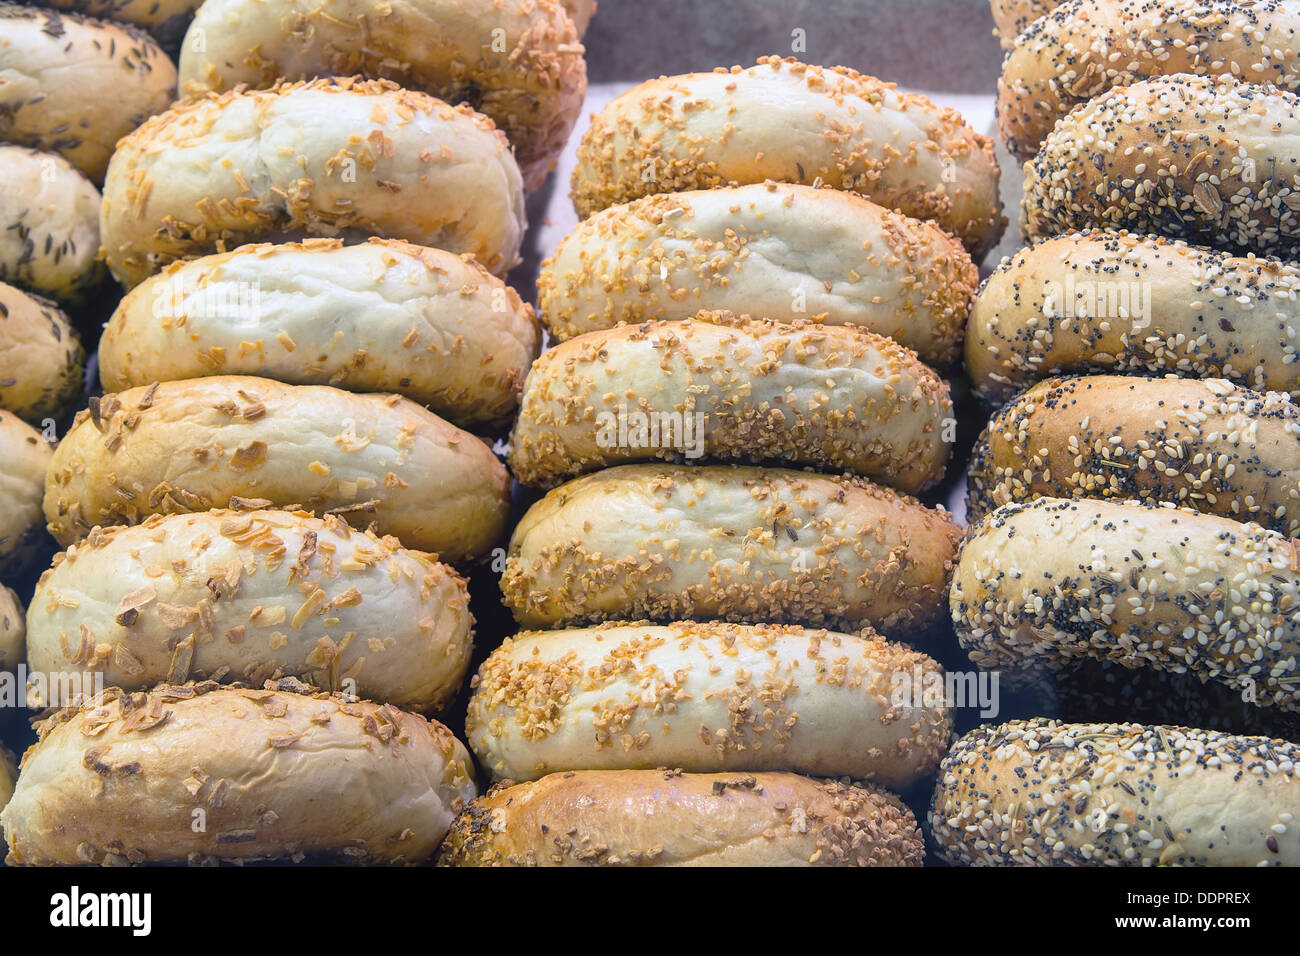 Variety of Bagels with Grains and Seeds at Bakery Shop Closeup Stock Photo